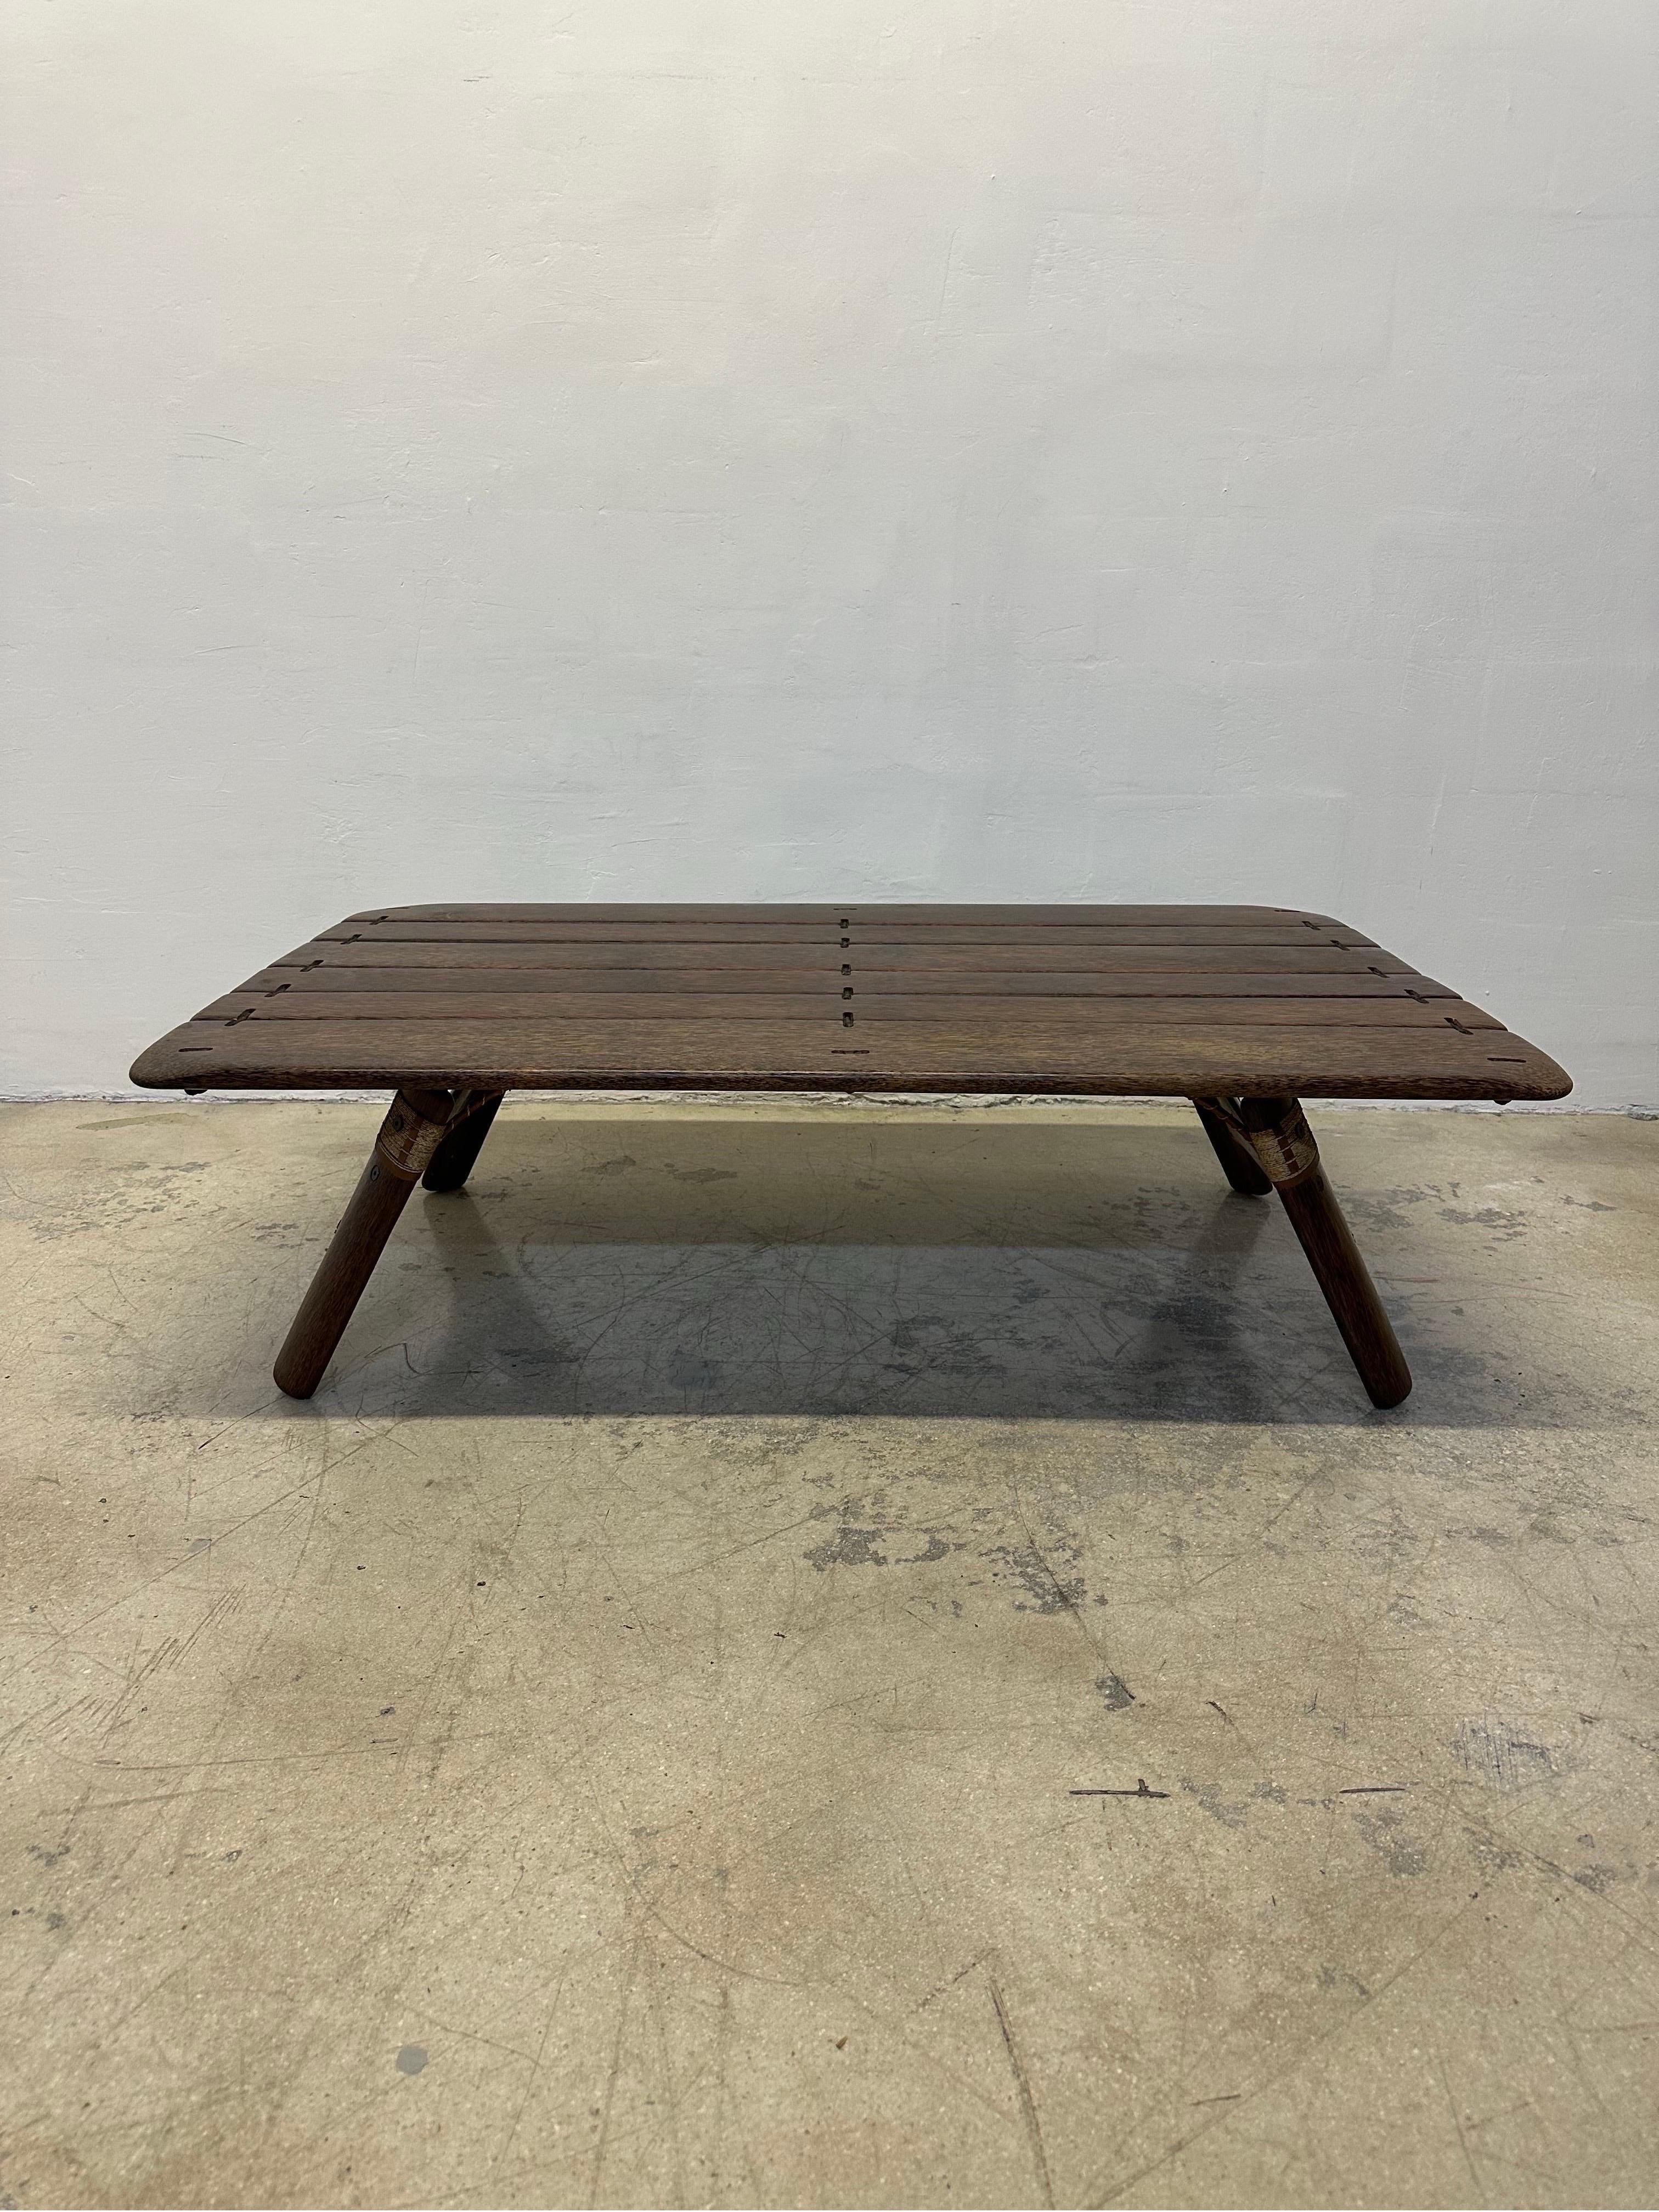 Pacific Green’s Navajo coffee table constructed from Palm hardwood, jute, iron and leather. Circa 2000s.  Pacific Green is a sustainable furniture manufacturer and developer of Palmwood, a durable hardwood made from discarded Coconut palms.